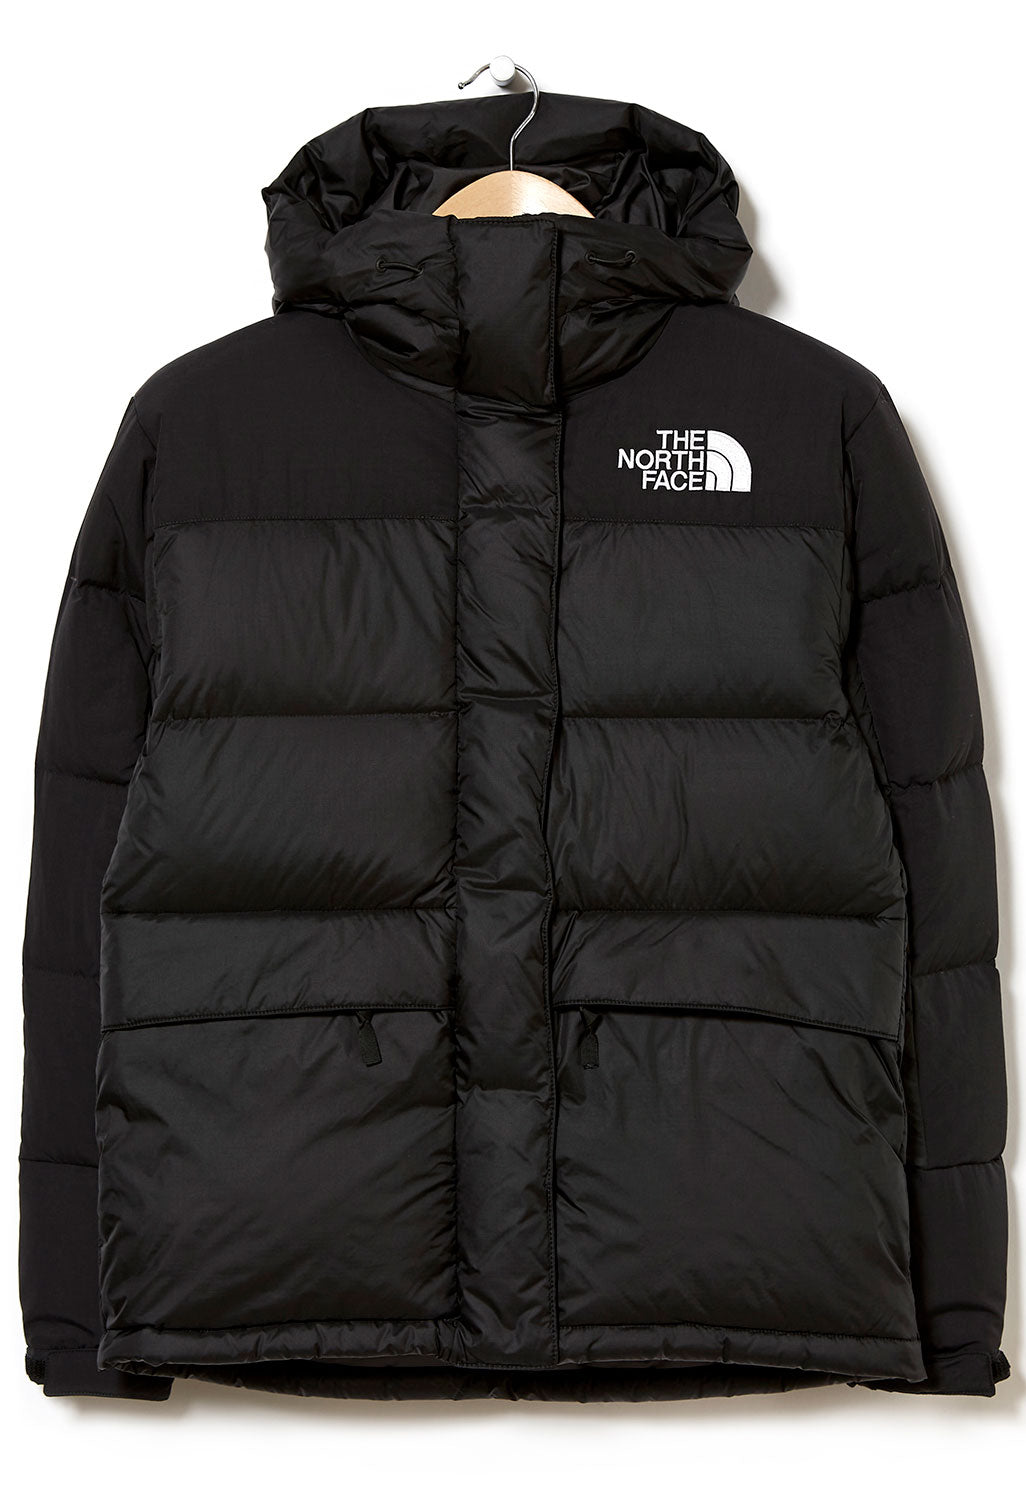 The North Face Himalayan Down Women's Parka Jacket 2